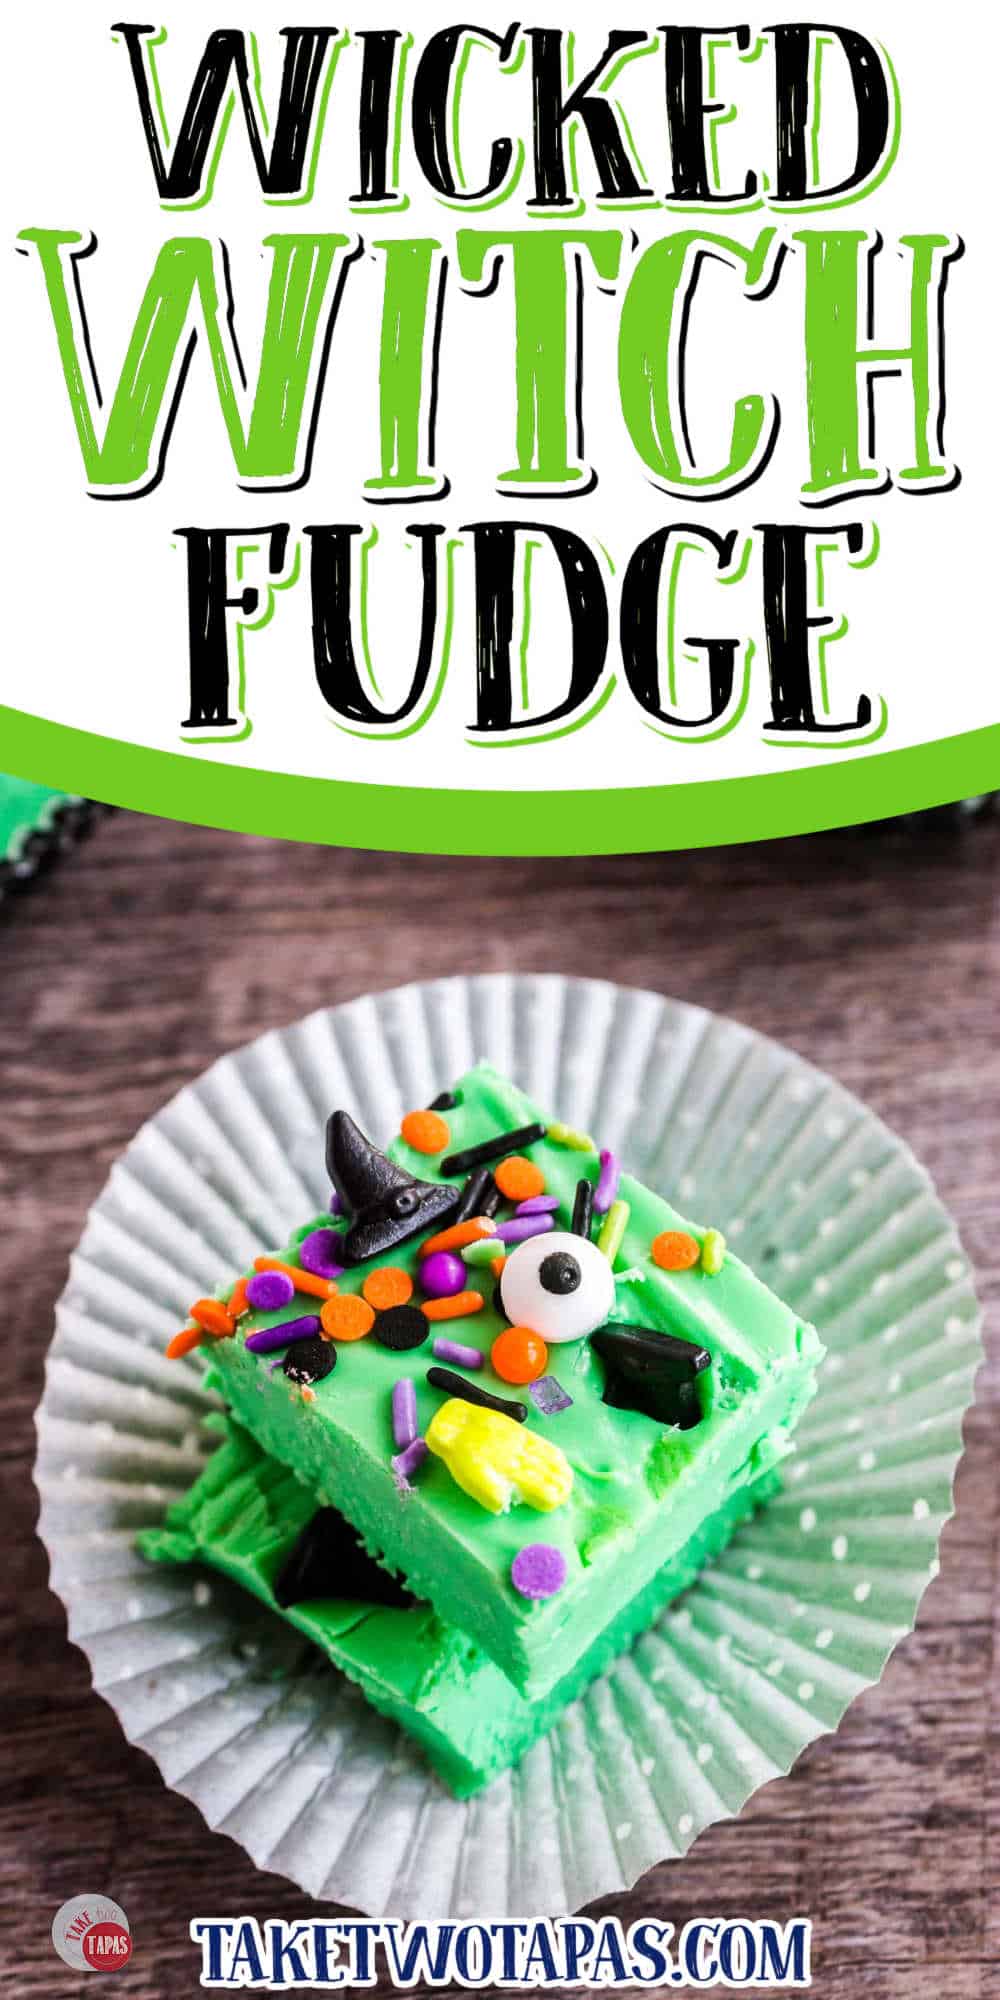 collage of fudge with text "wicked witch fudge"